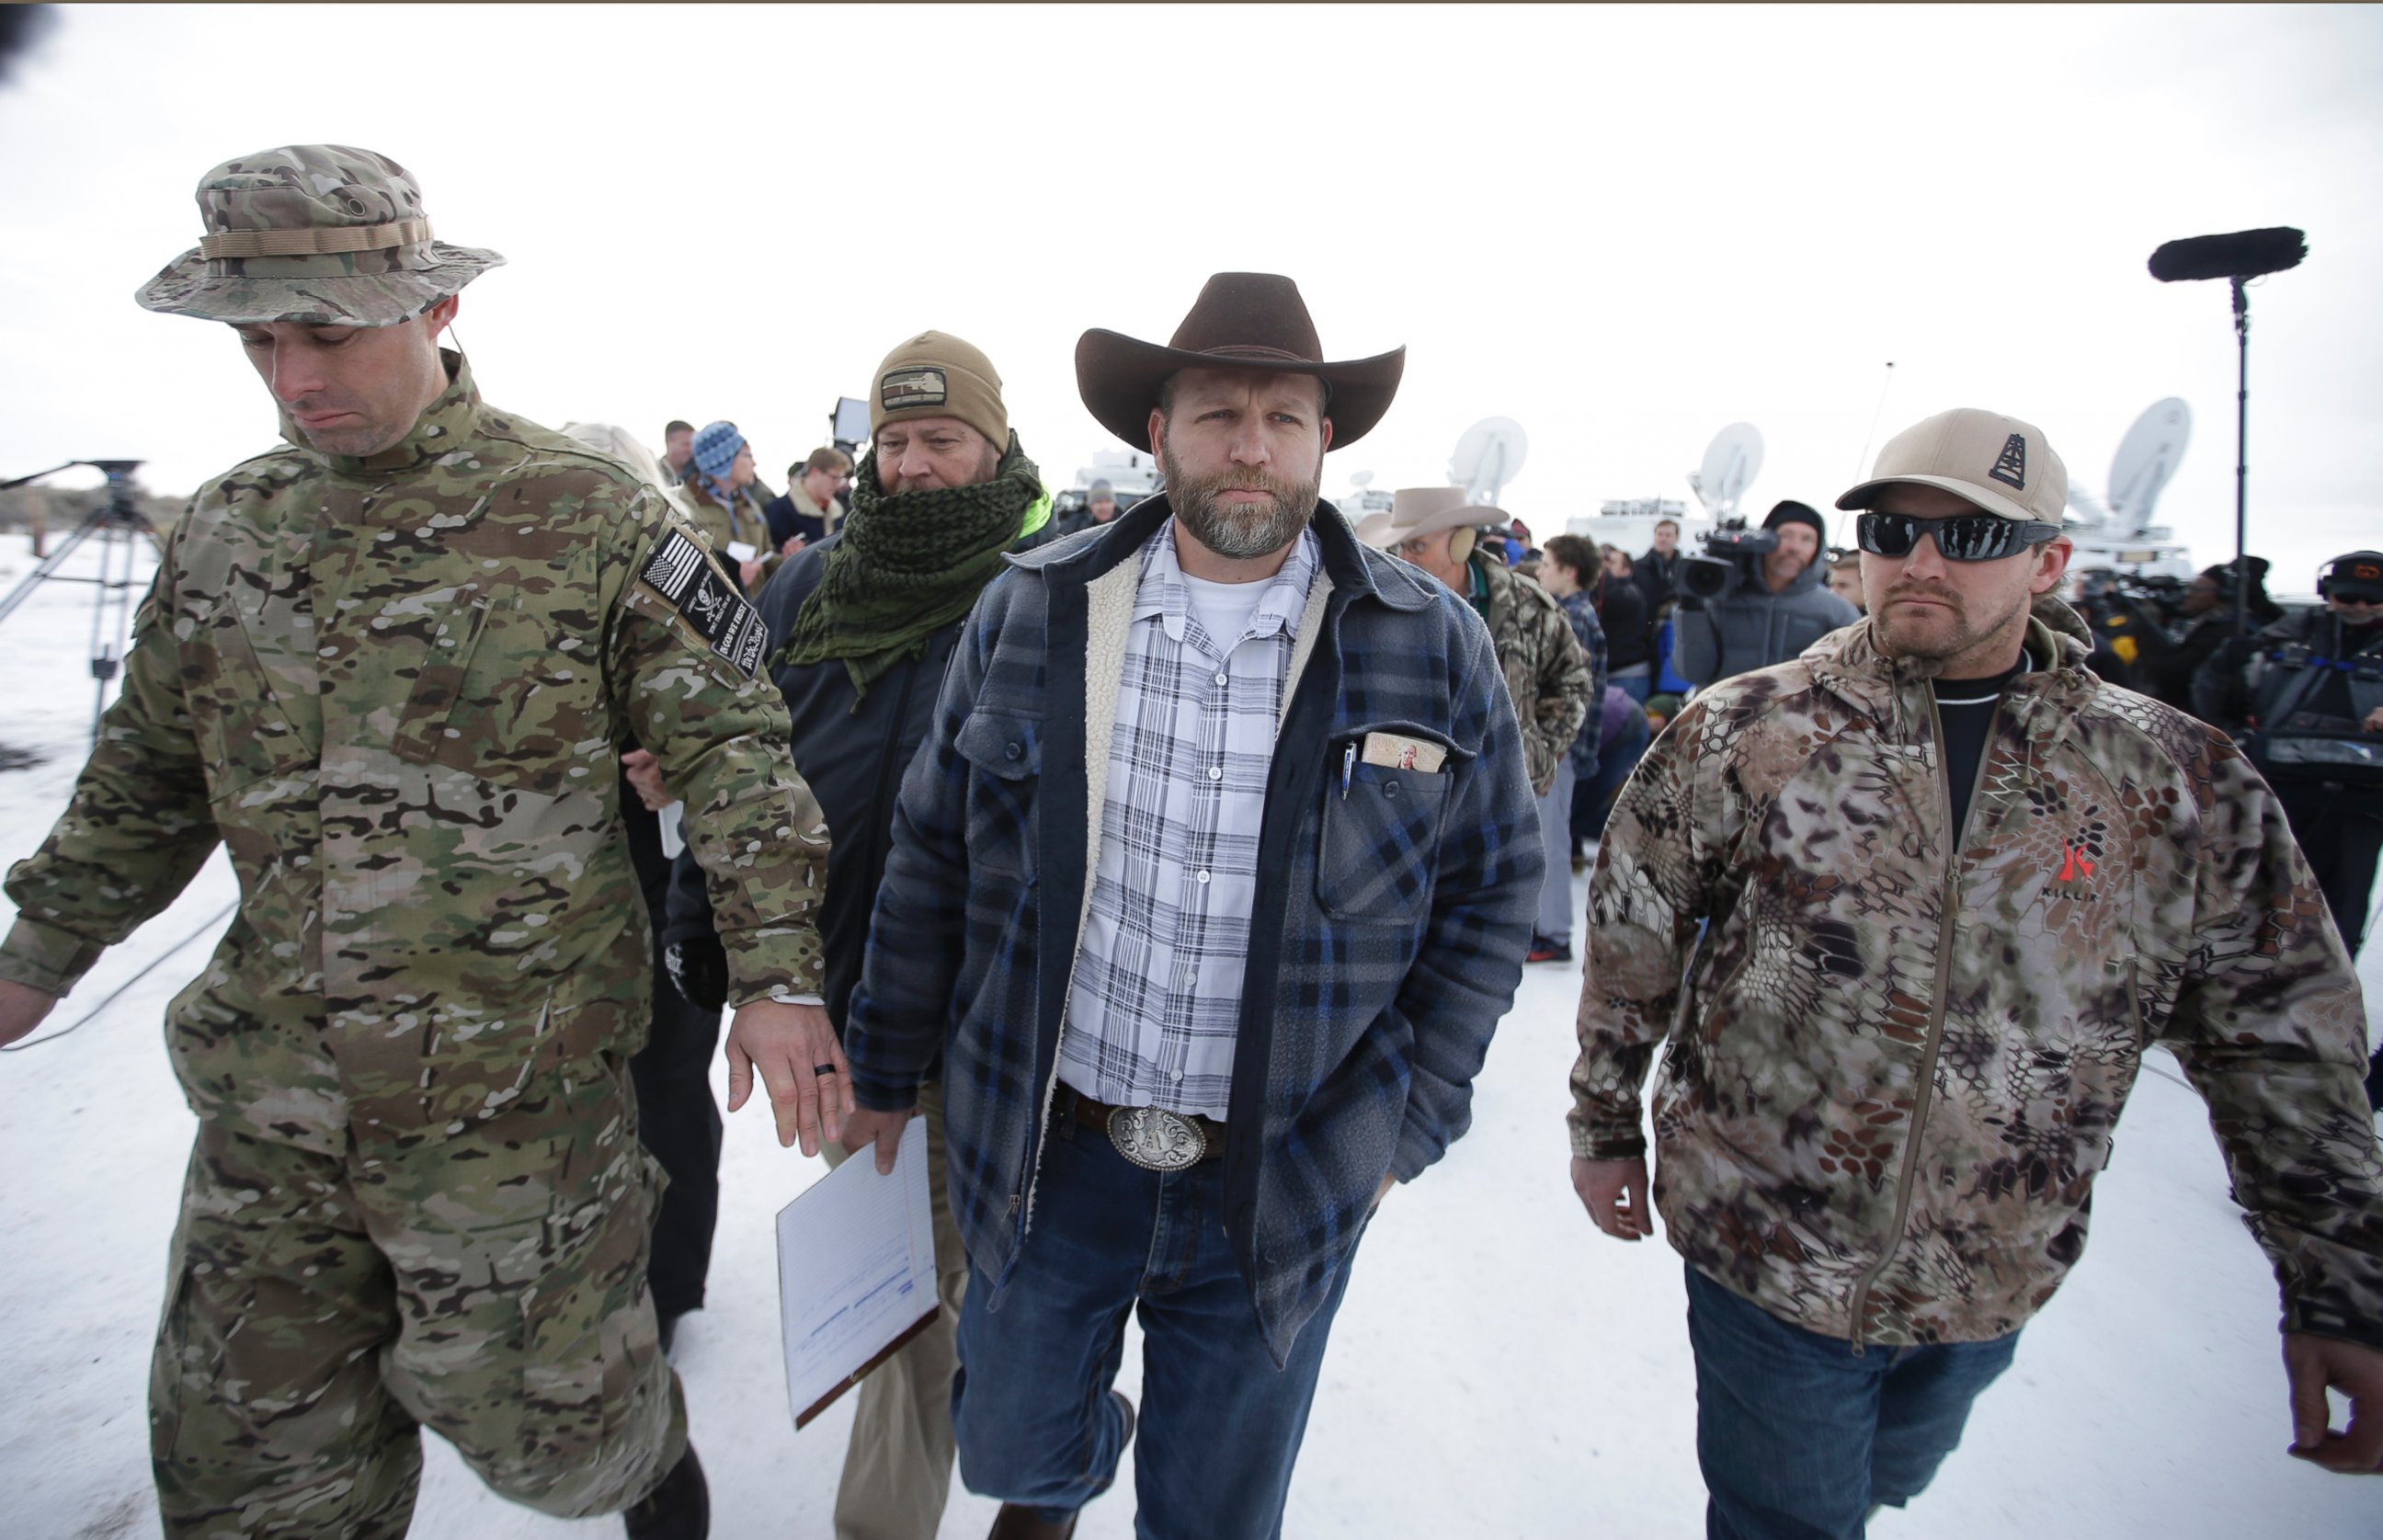 PHOTO: Ammon Bundy, center, walks off after speaking with reporters during a news conference at Malheur National Wildlife Refuge headquarters, Jan. 4, 2016, near Burns, Ore.